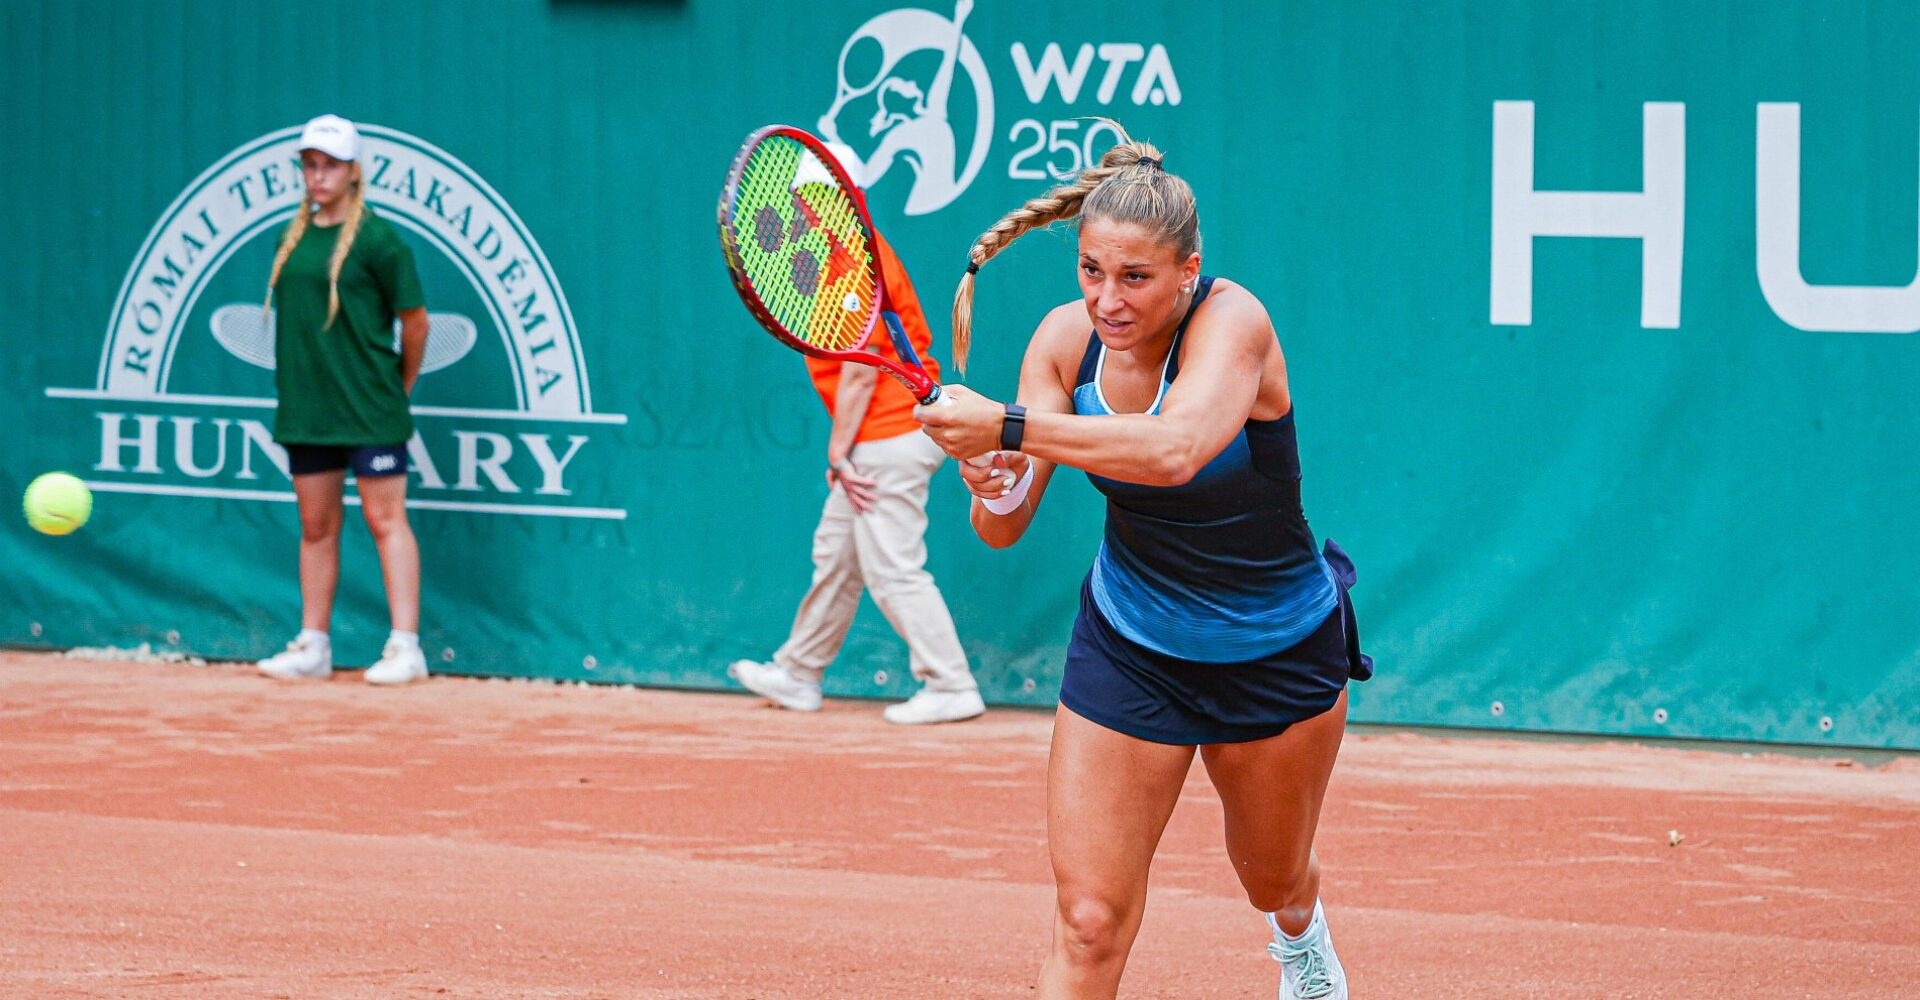 Hungary’s Udvardy wins first WTA title in Argentina